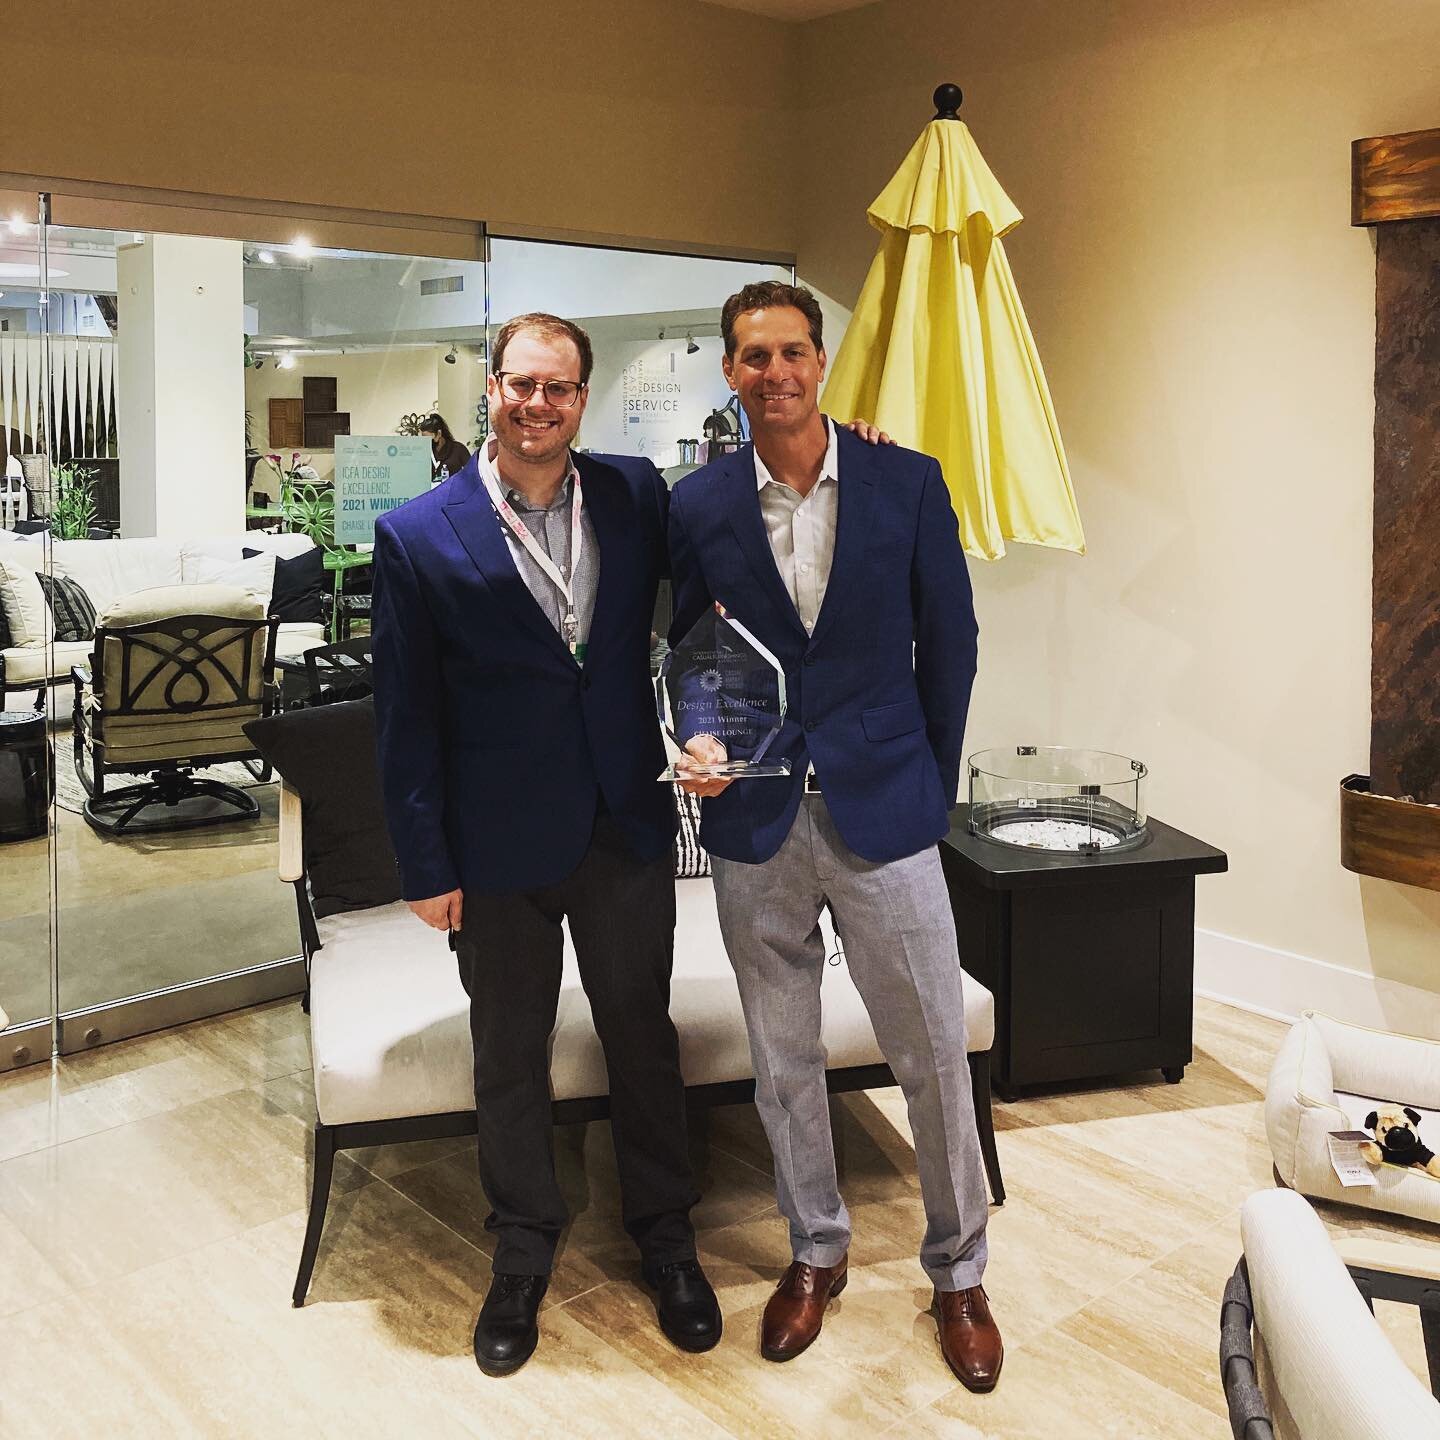 We were honored to accept the ICFA Design Excellence Award last week at the @casualmarketchicago for our Jayne Chaise Lounge for @gensuncasual. Thank you @icfa08 

#casualmarket #outdoorfurniture #outdoorfurnituredesign #awardwinningdesign #furniture